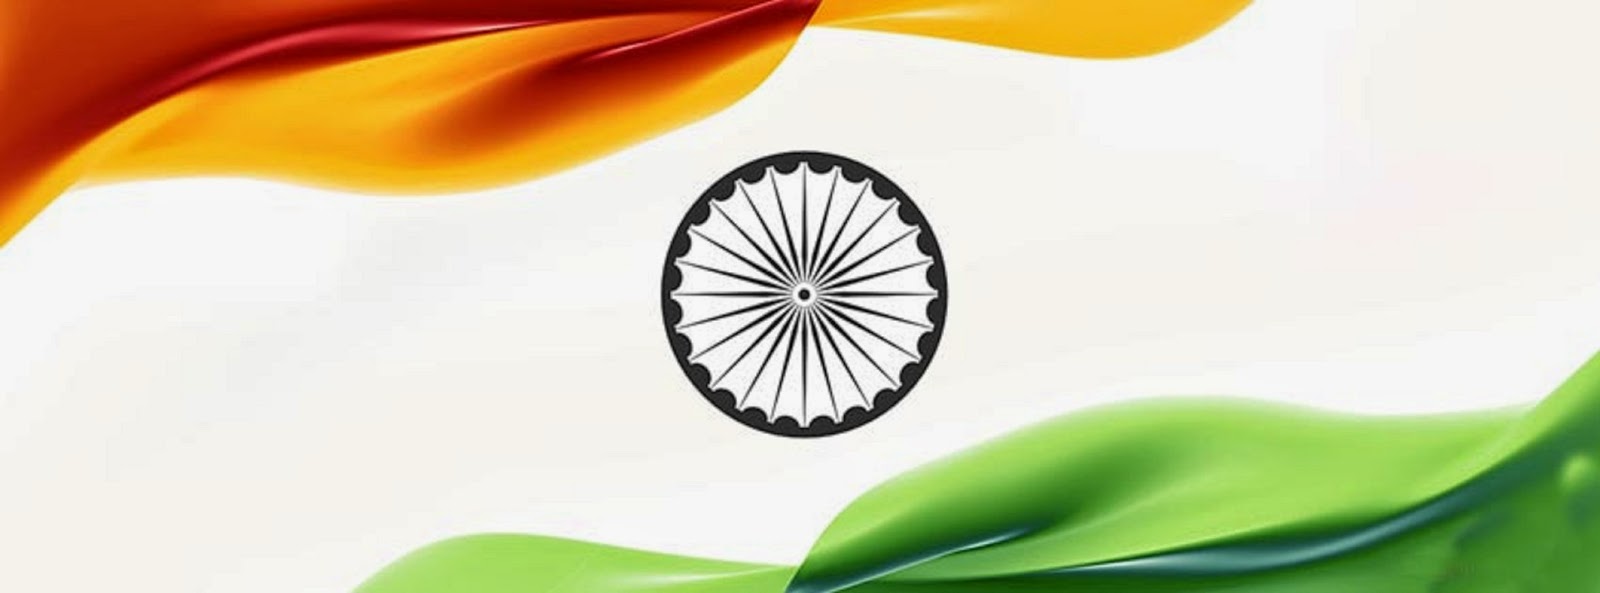 India Independence Day For Facebook Cover HDWallpaper Free